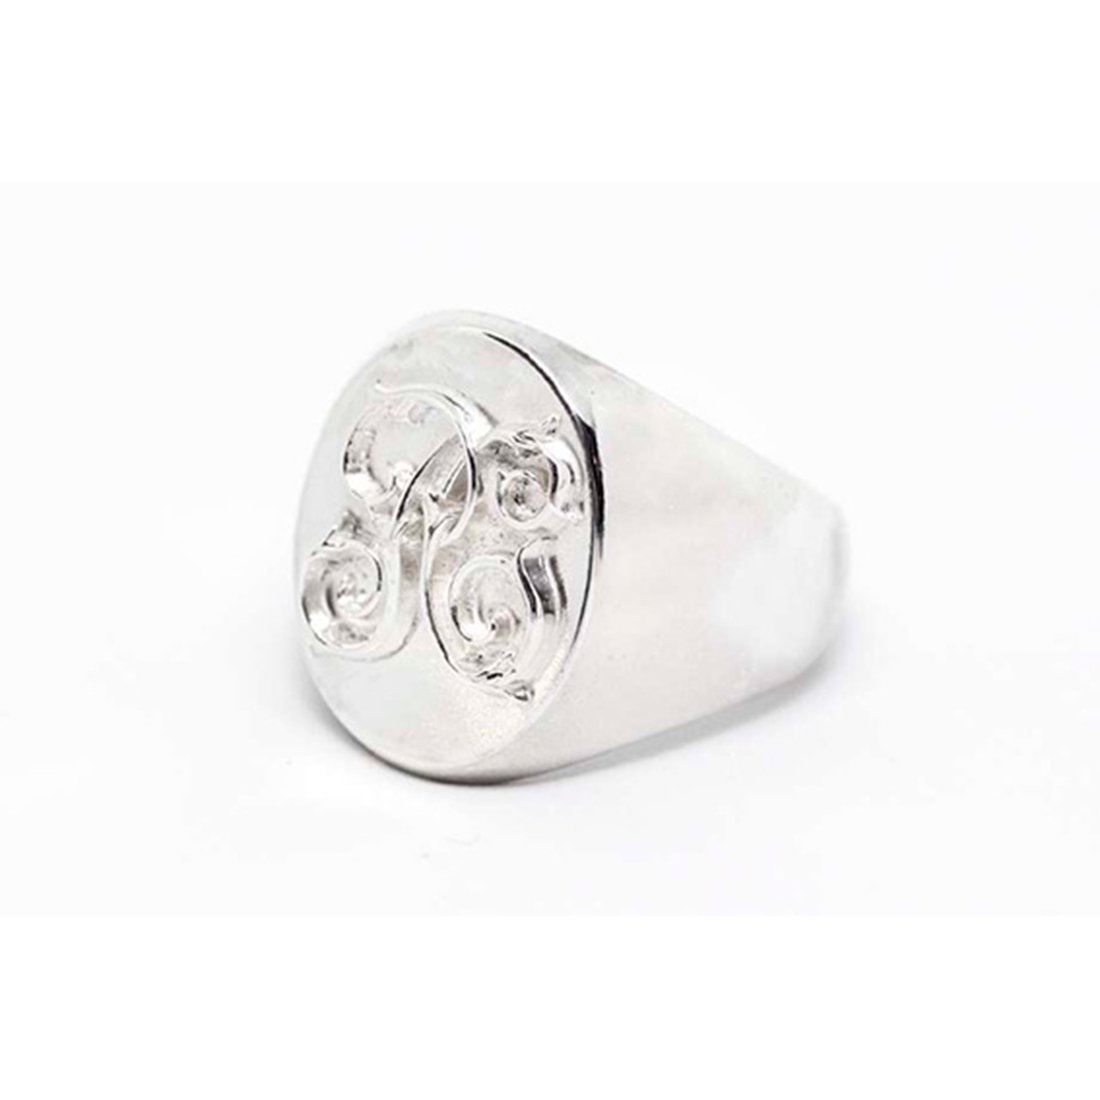 PEANUTS & Co.　#Signet Ring -Small